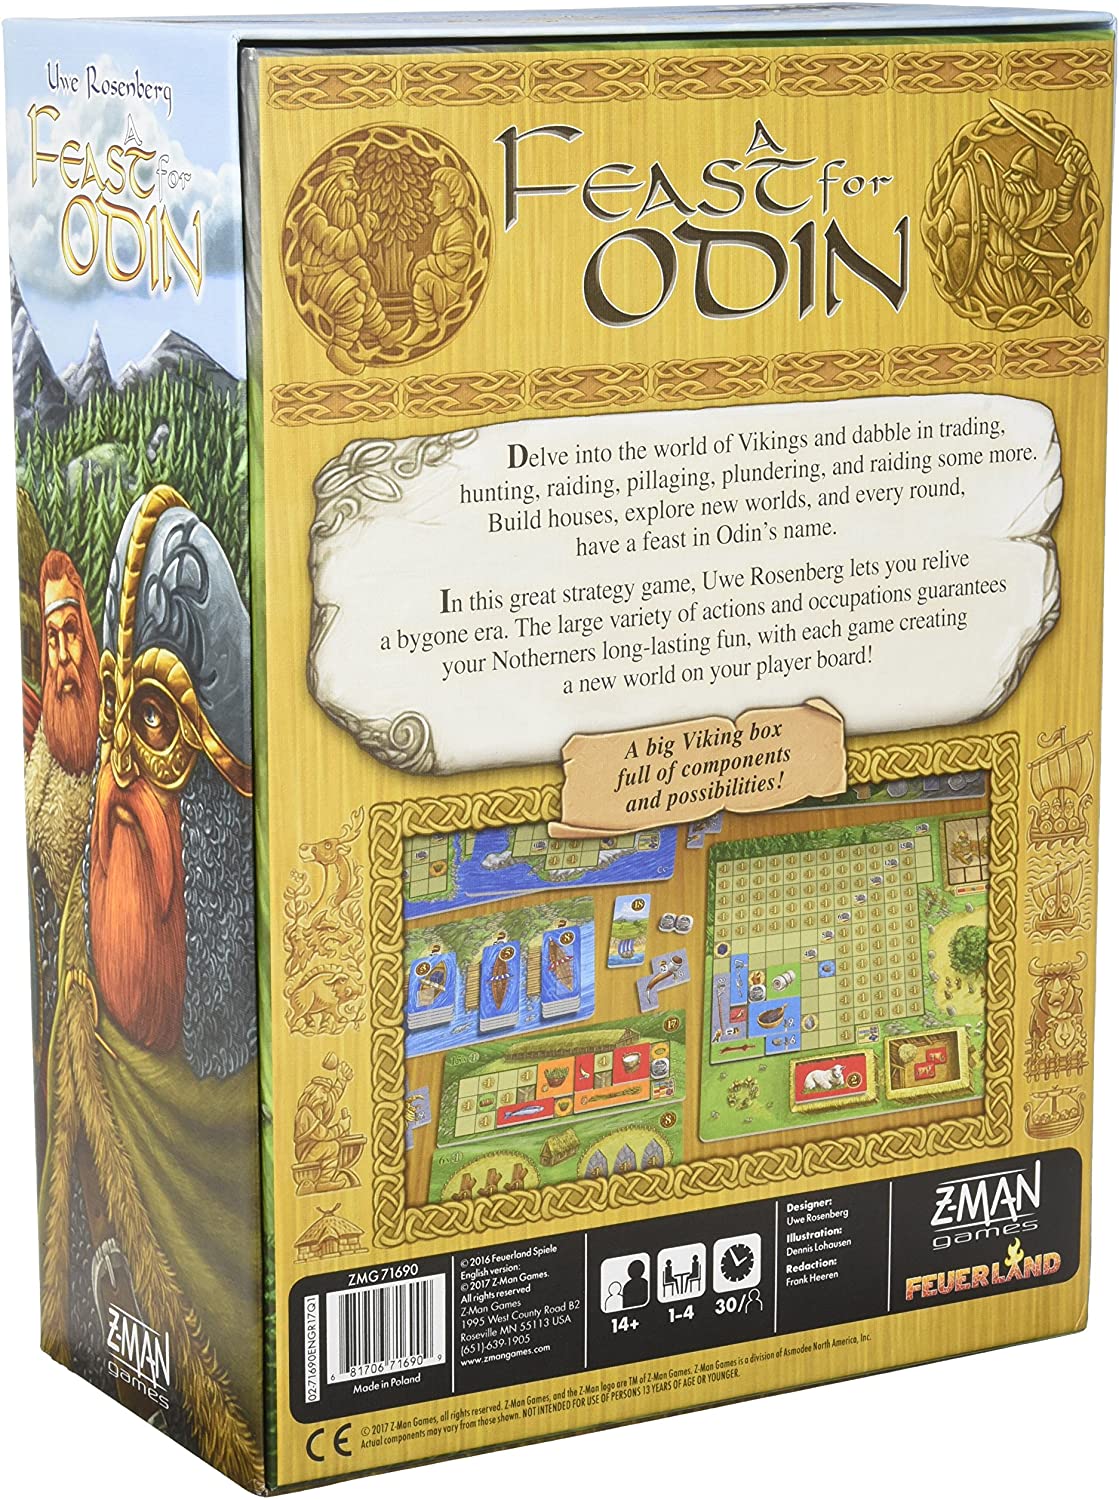 Find out about A Feast for Odin